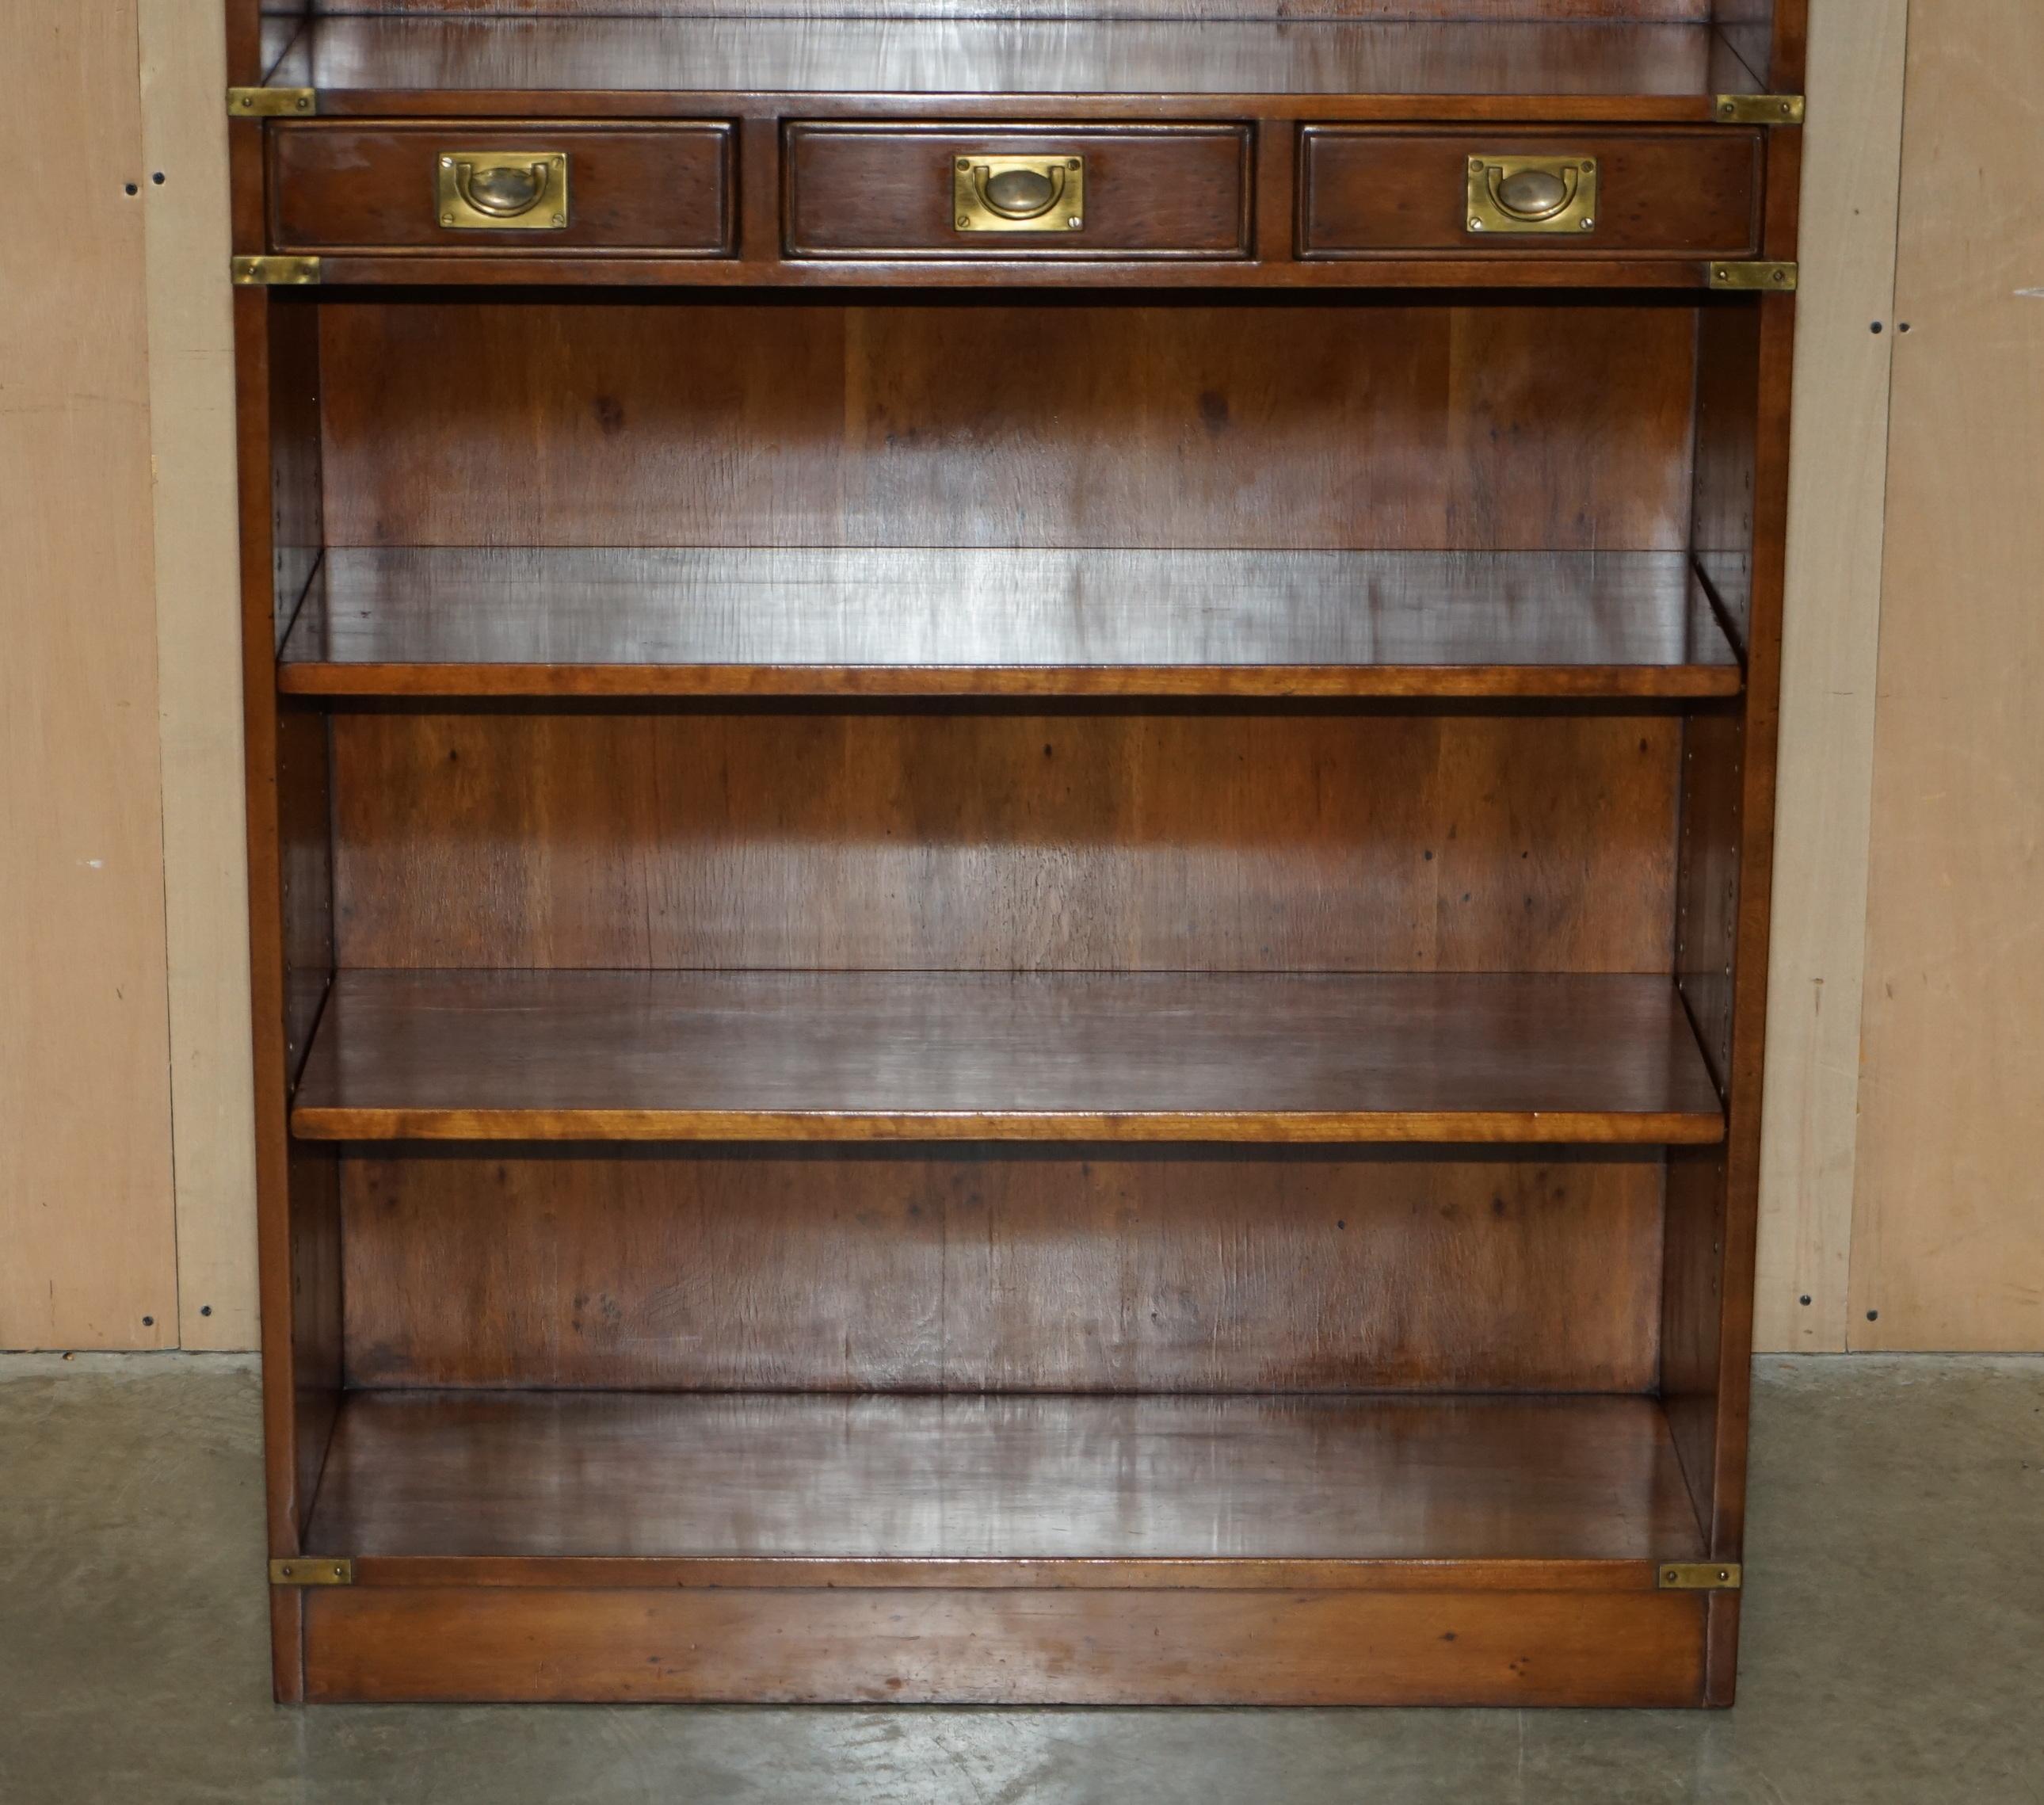 English HARRODS KENNEDY THREE DRAWER BURR YEW WOOD & BRASS MiLITARY CAMPAIGN BOOKCASE